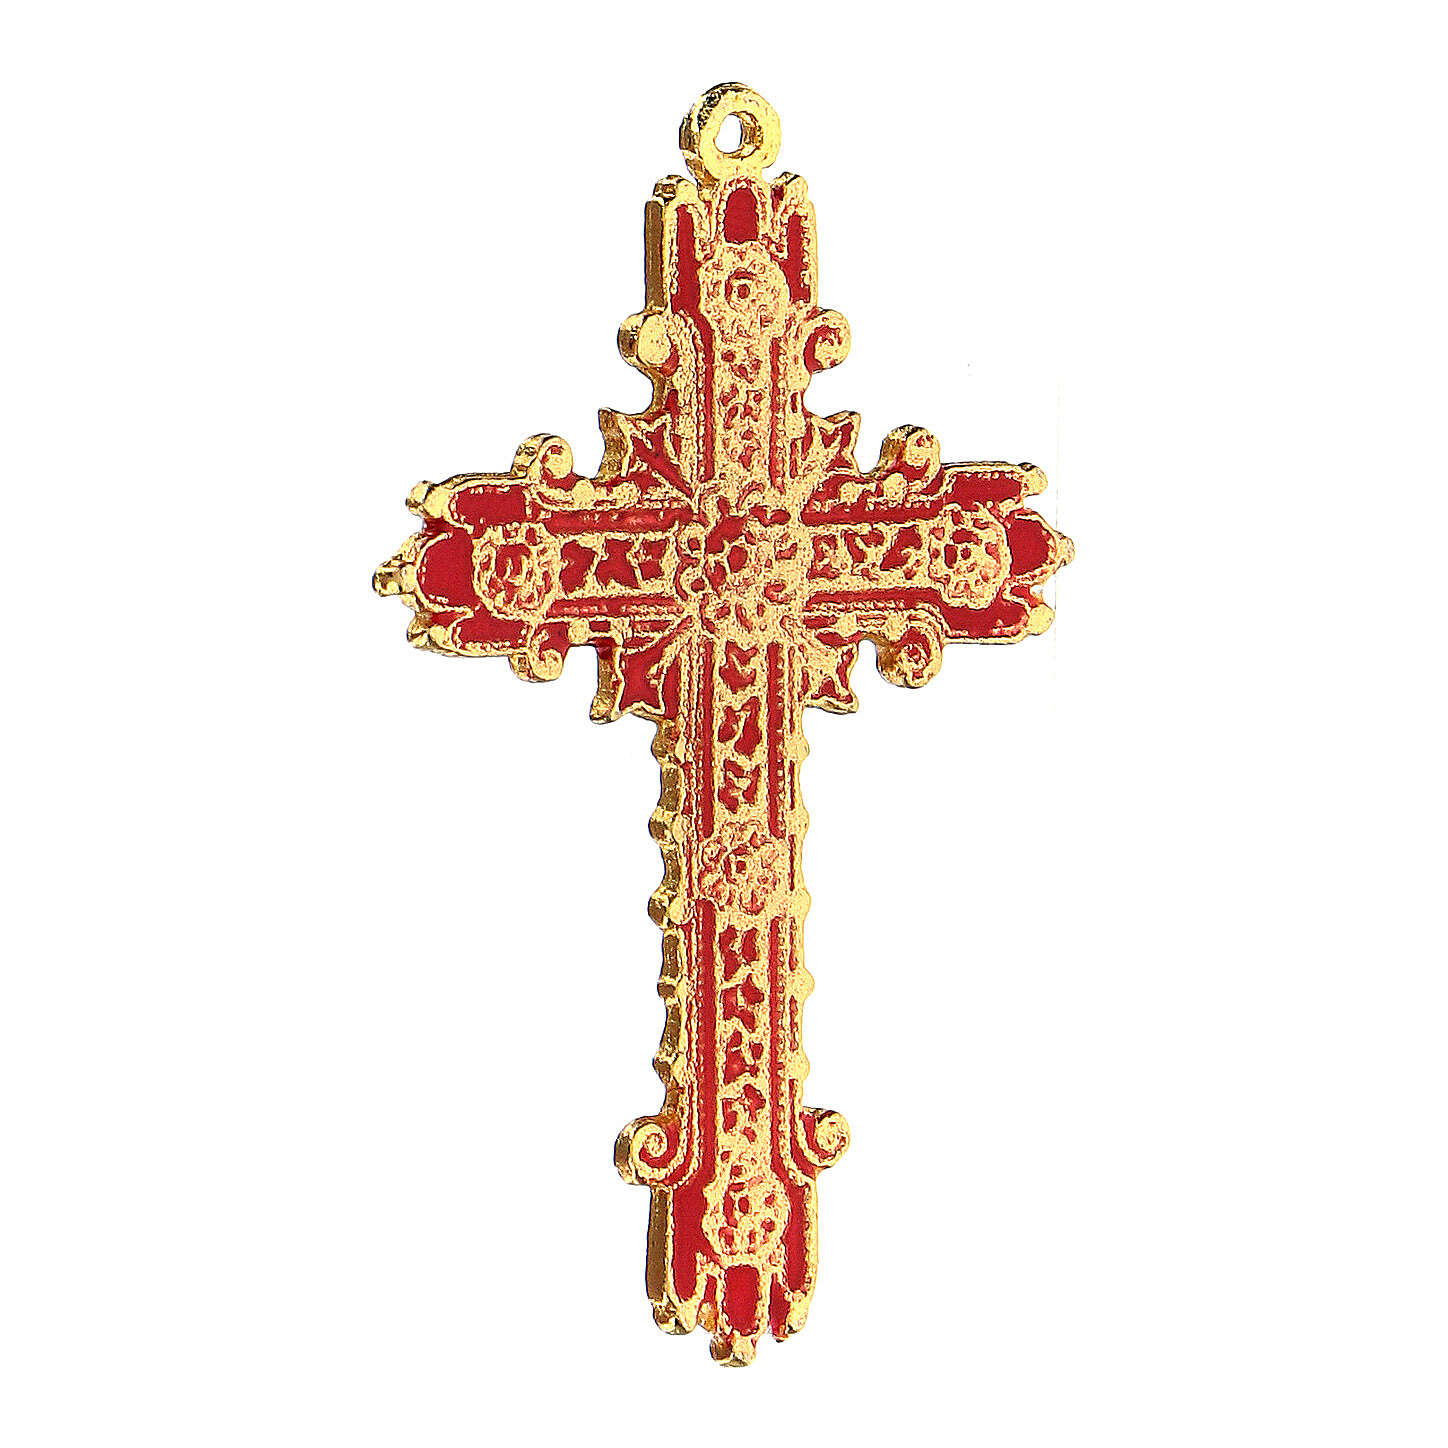 Gold tone Cross with red enamel pendant.